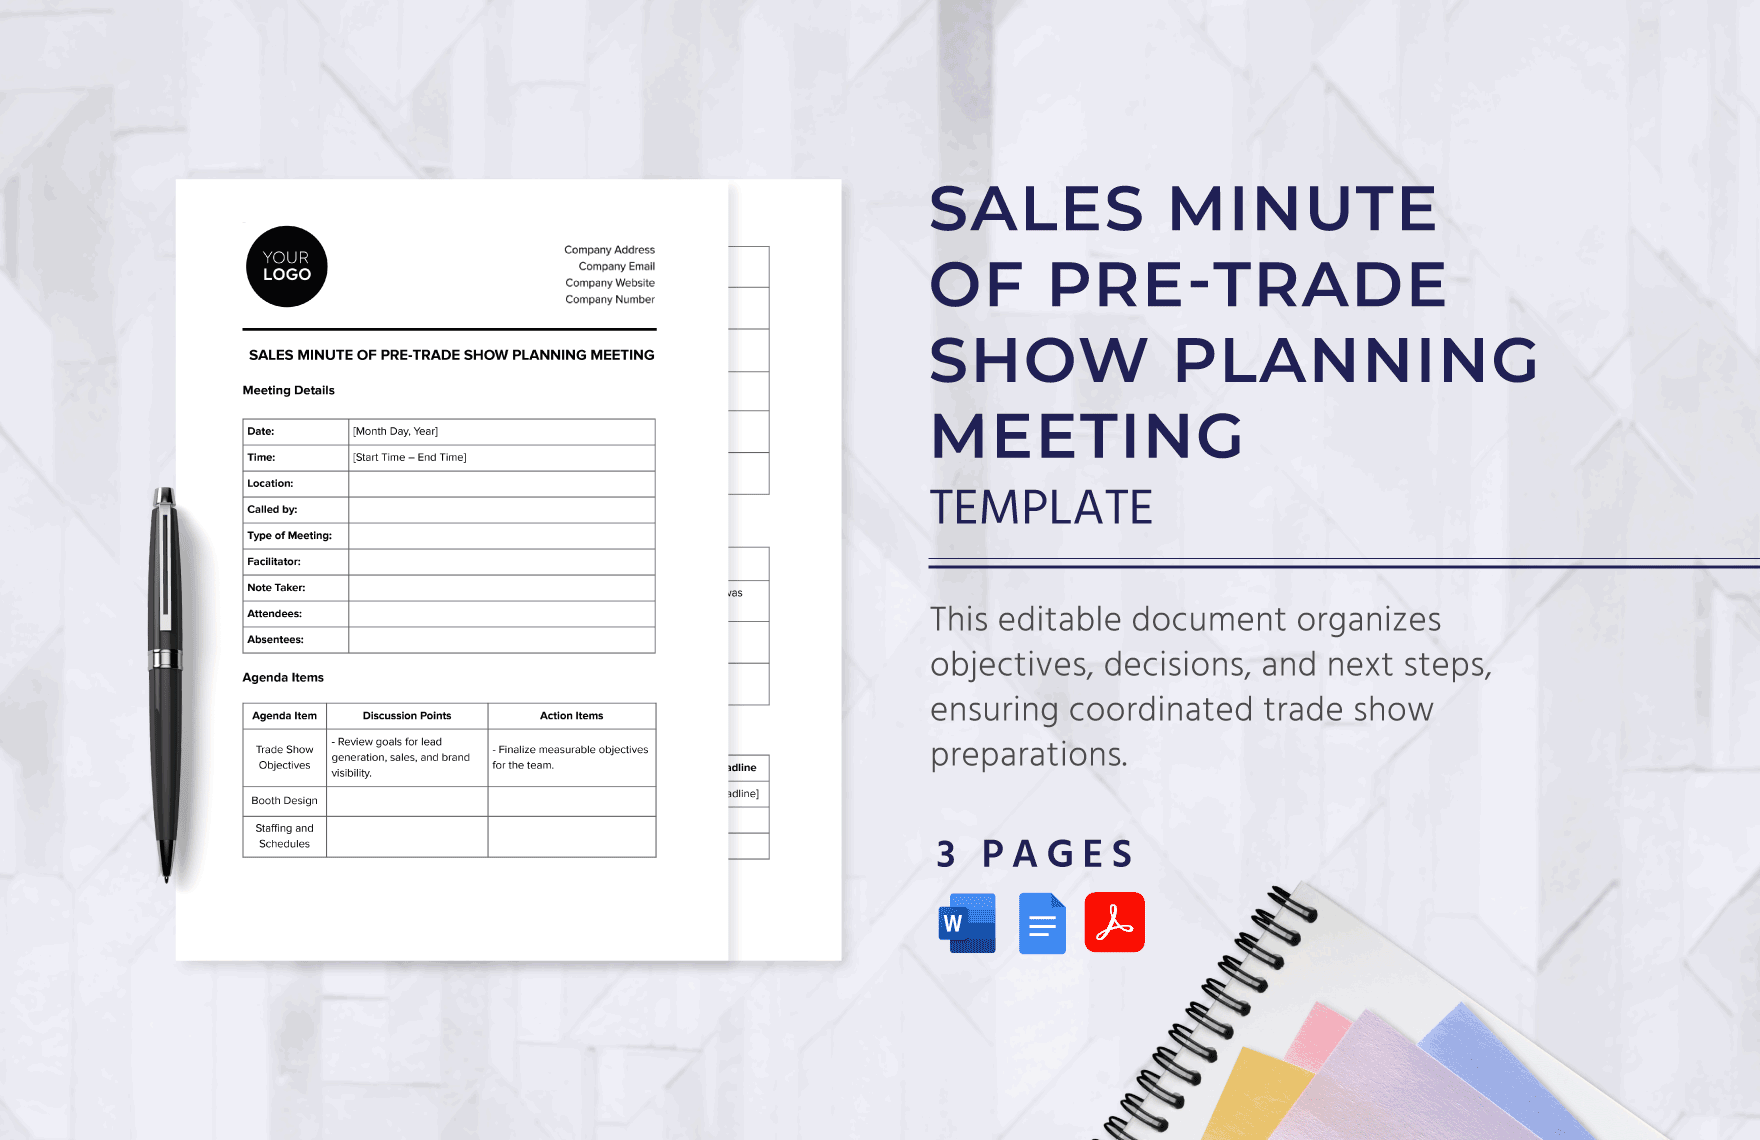 Sales Minute of Pre-Trade Show Planning Meeting Template